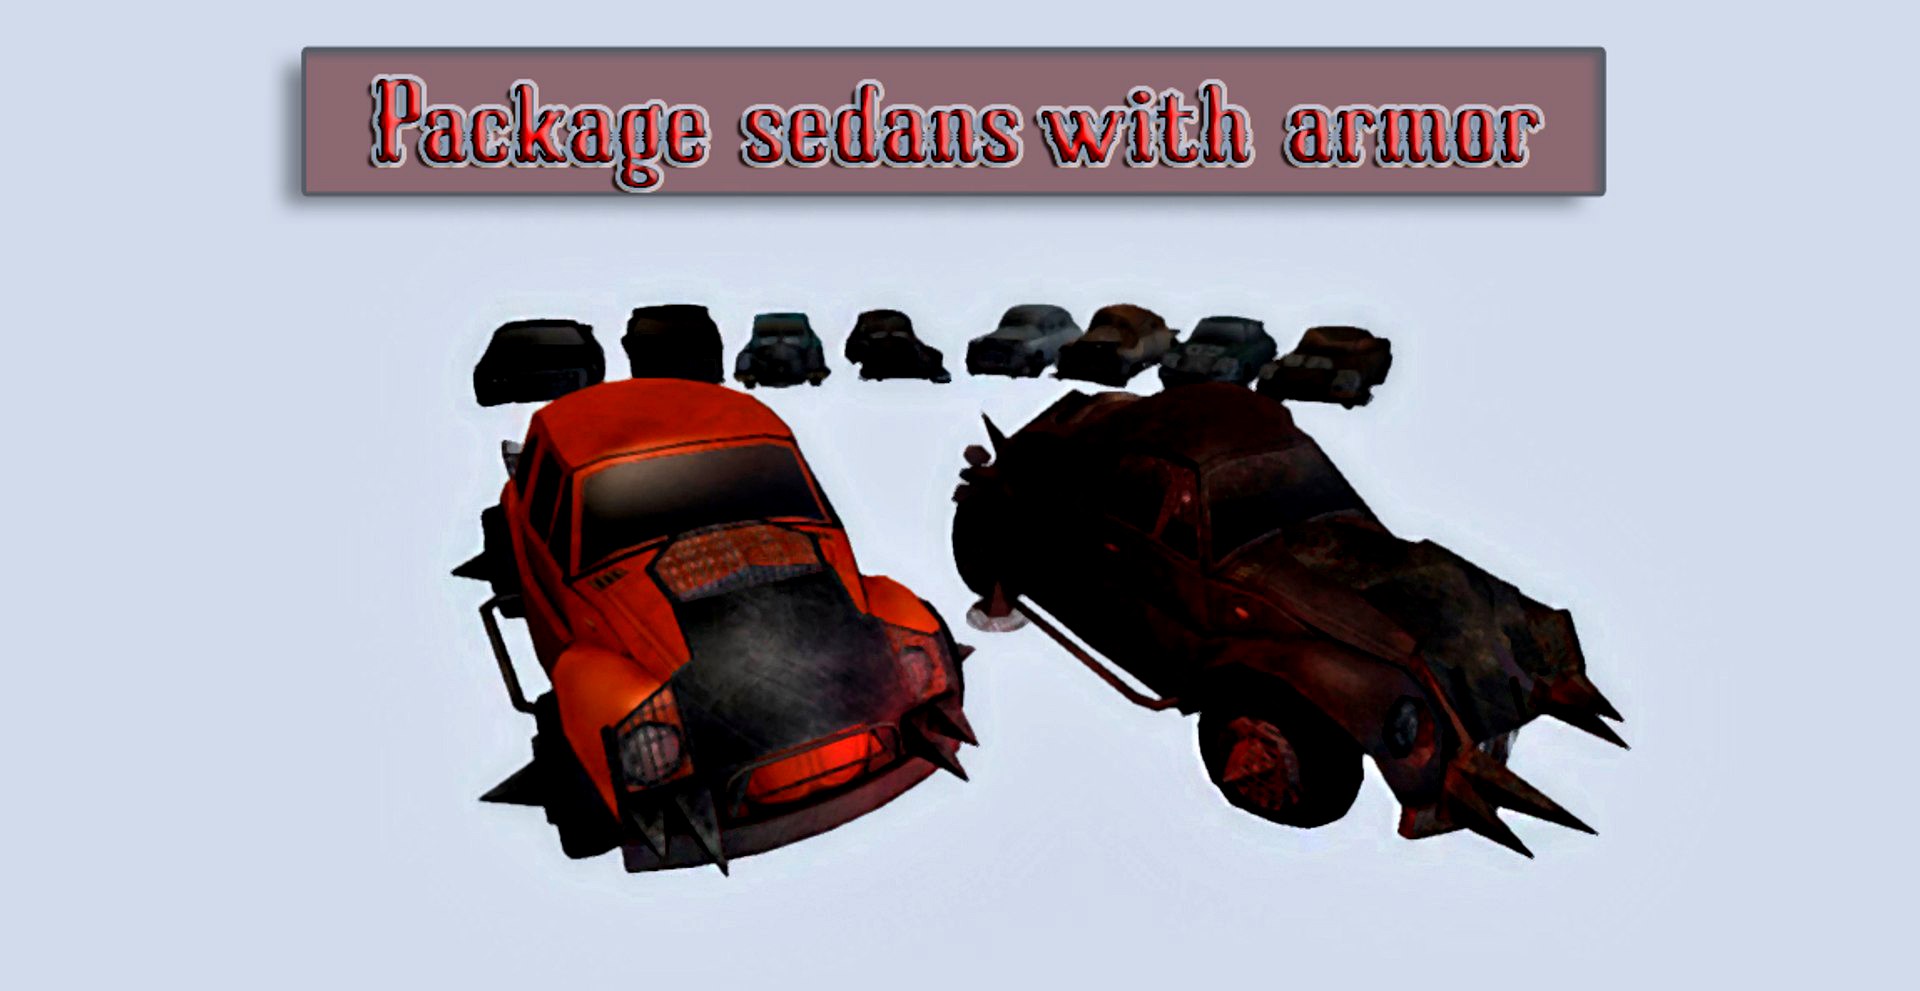 Package sedans with armor